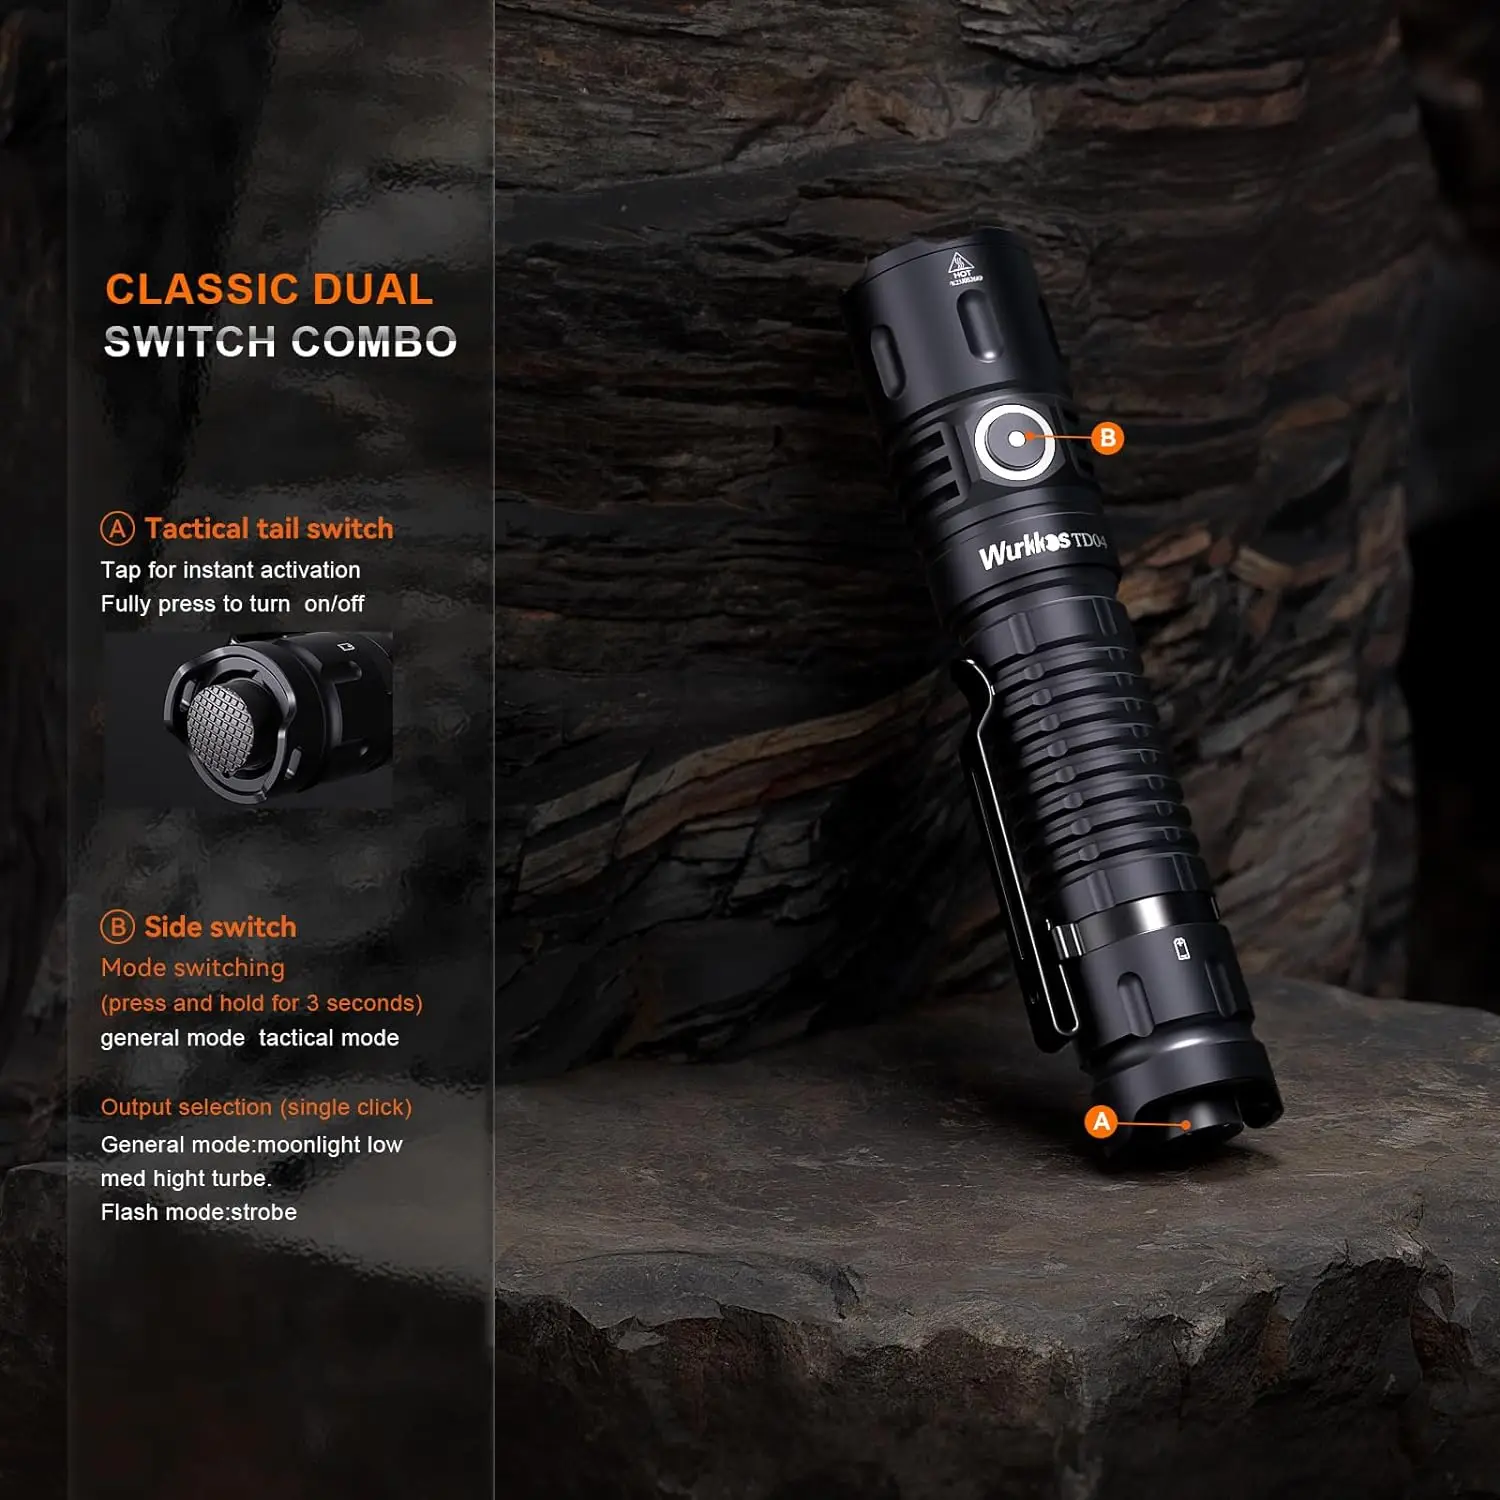 Wurkkos TD04 21700 Rechargeable Two Mode Group Tactical XHP50D HI Flashlight USB-C 3000 Lm Torch IP68 Waterproof EDC Tail Switch